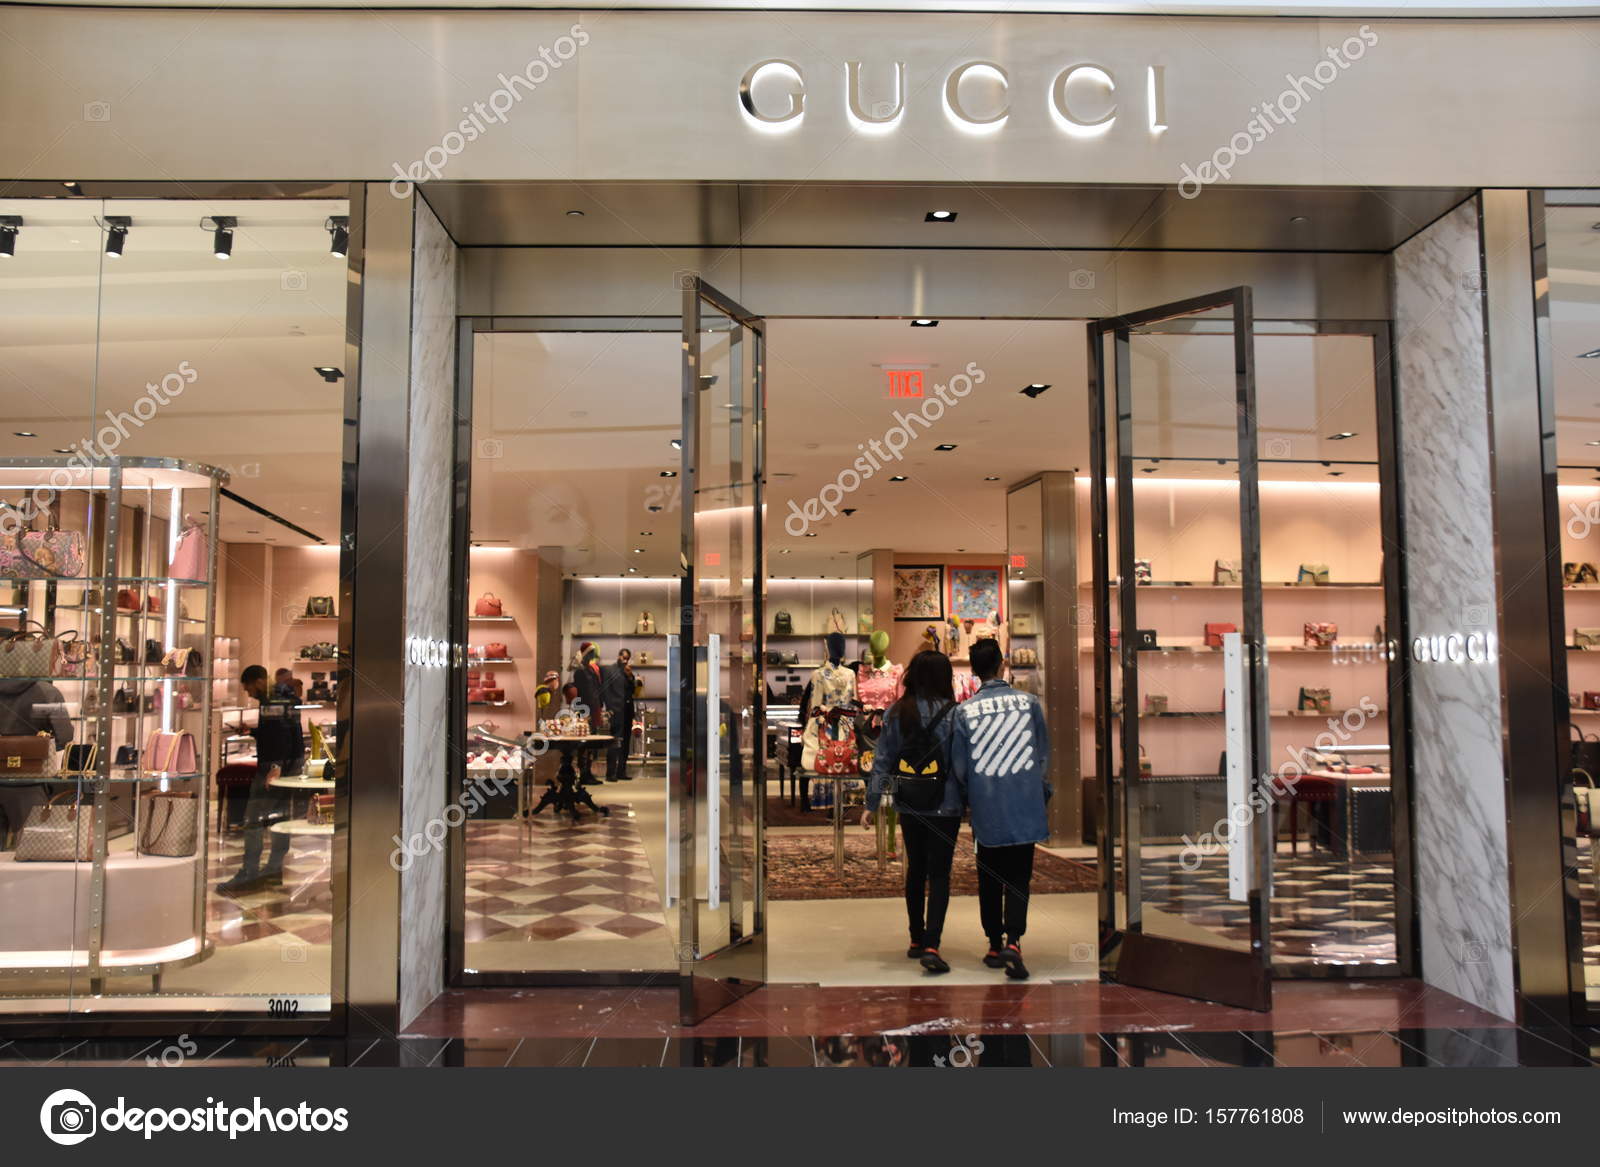 gucci at roosevelt field mall